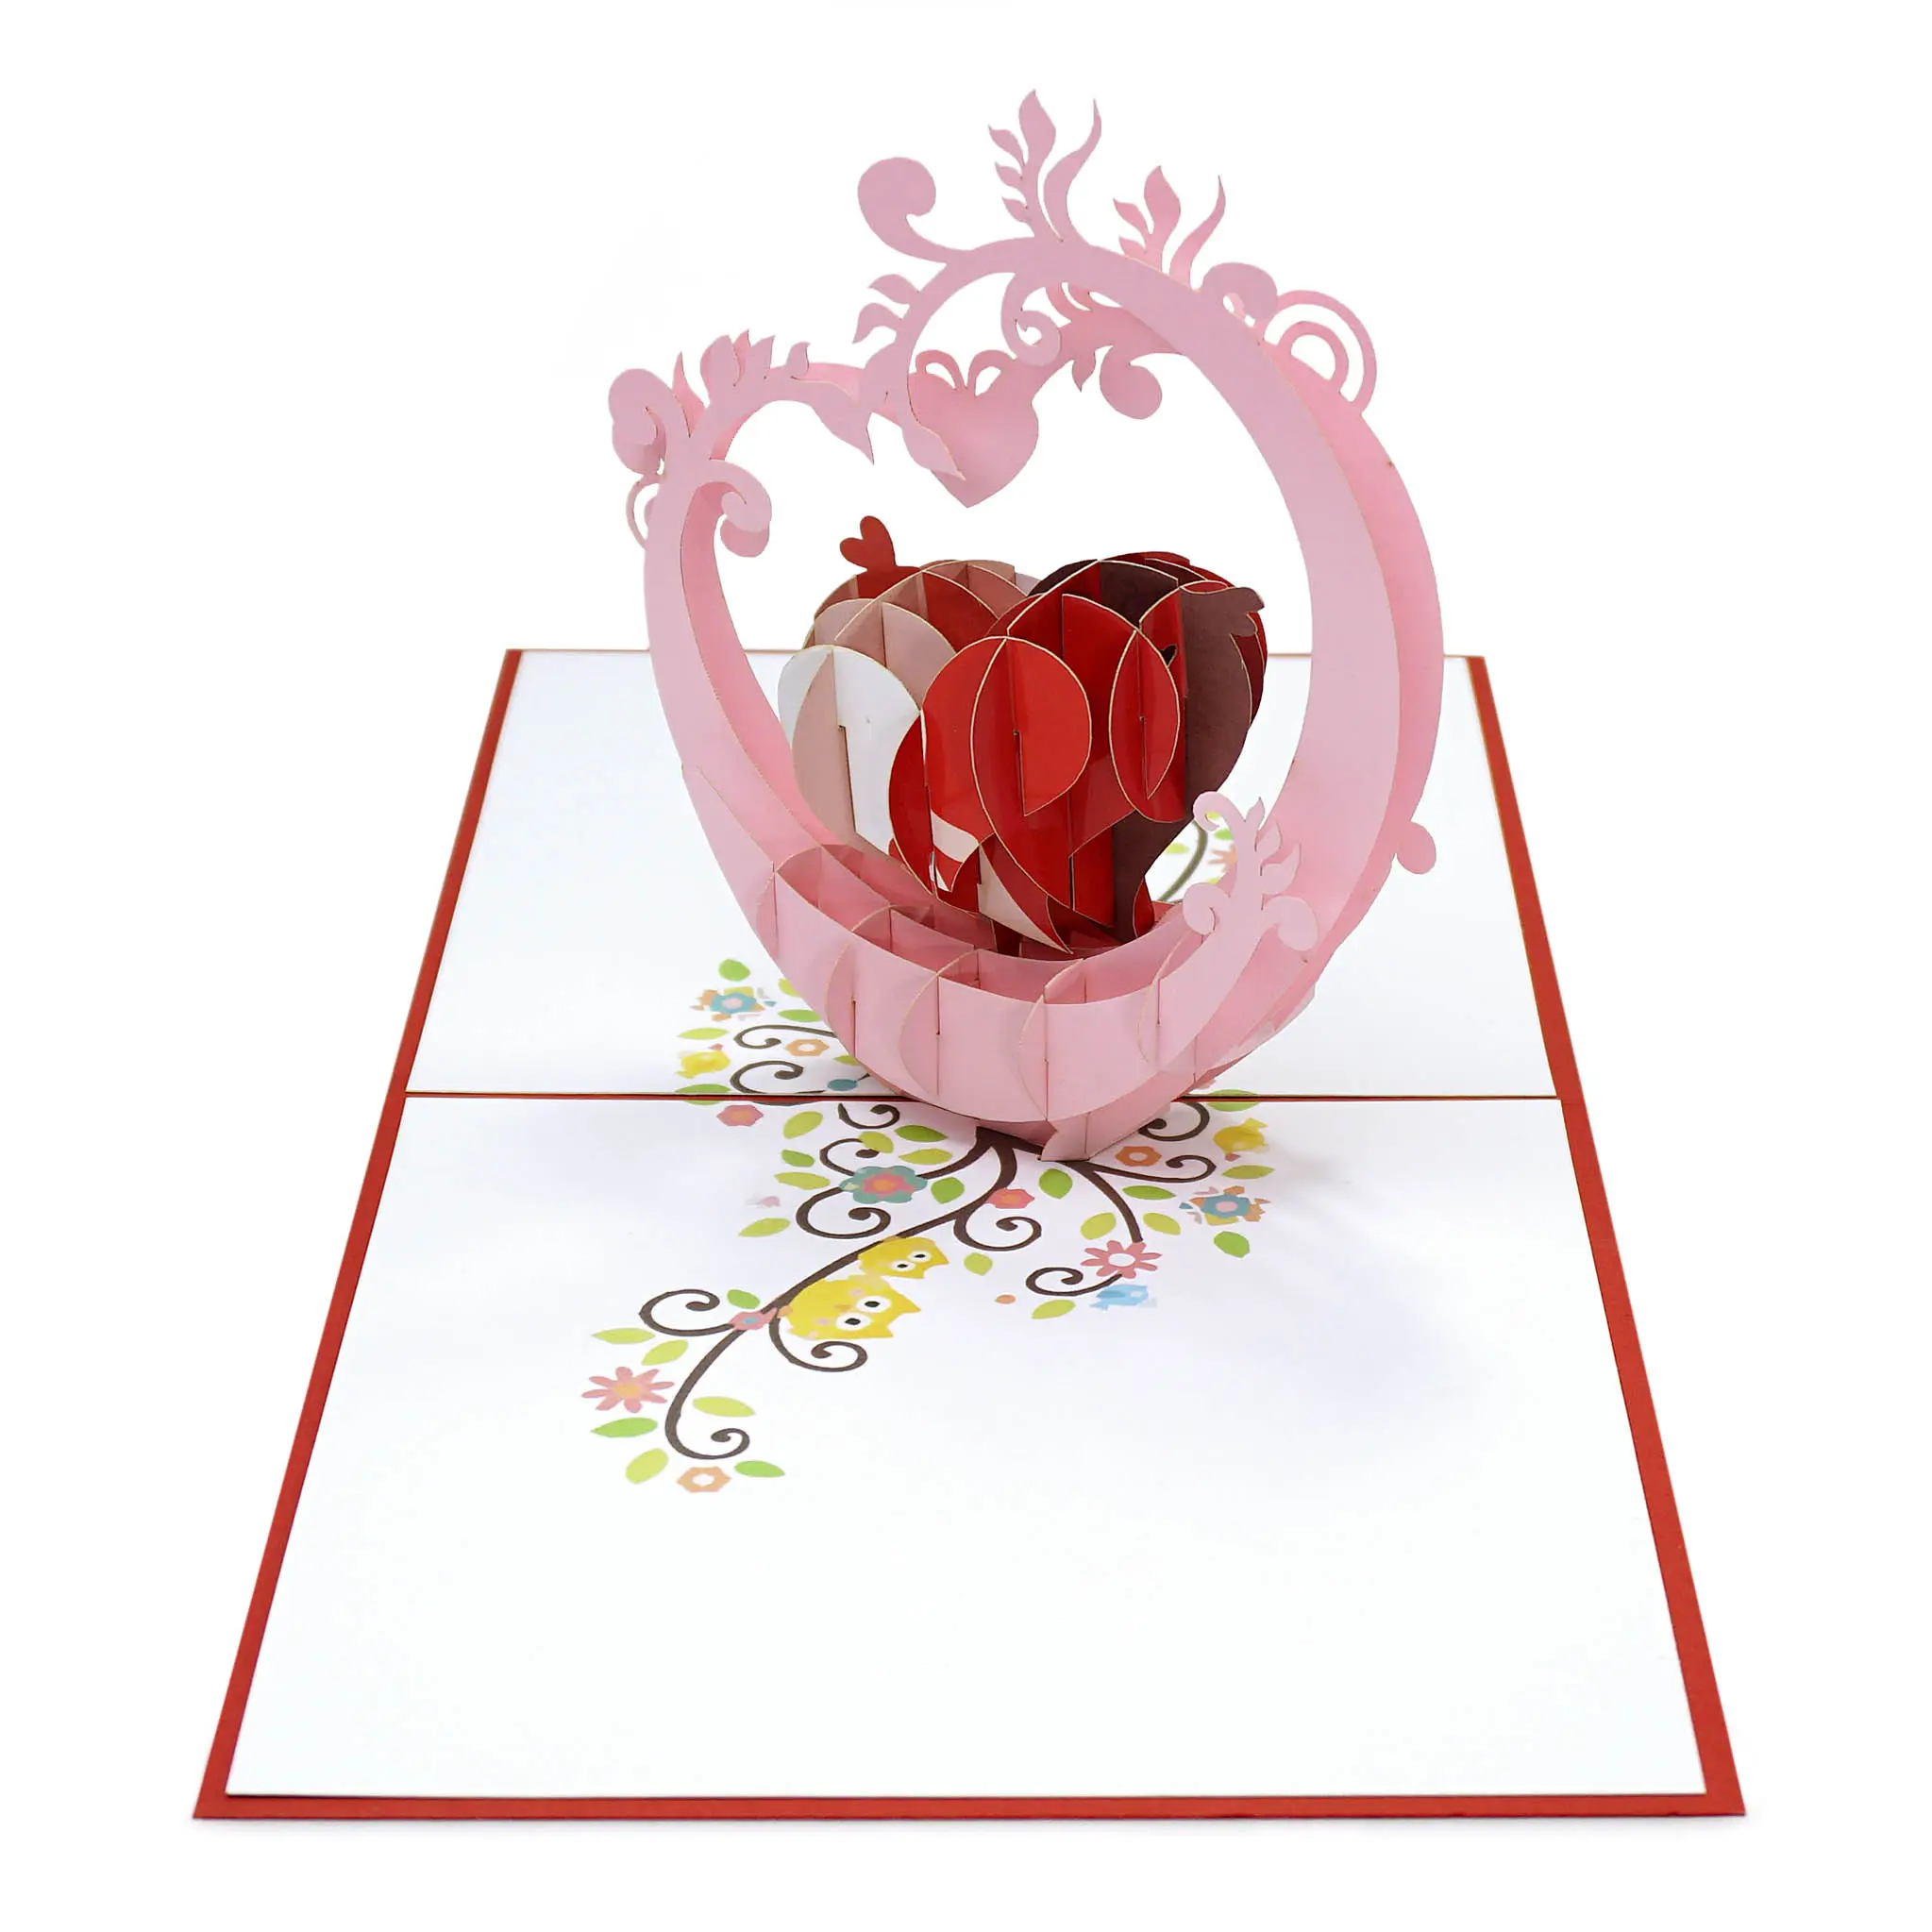 3D Loves Pop Up Greeting Cards Best Choice For Valentine day with nice the heart model 2023 from HMG Vietnam Supplier